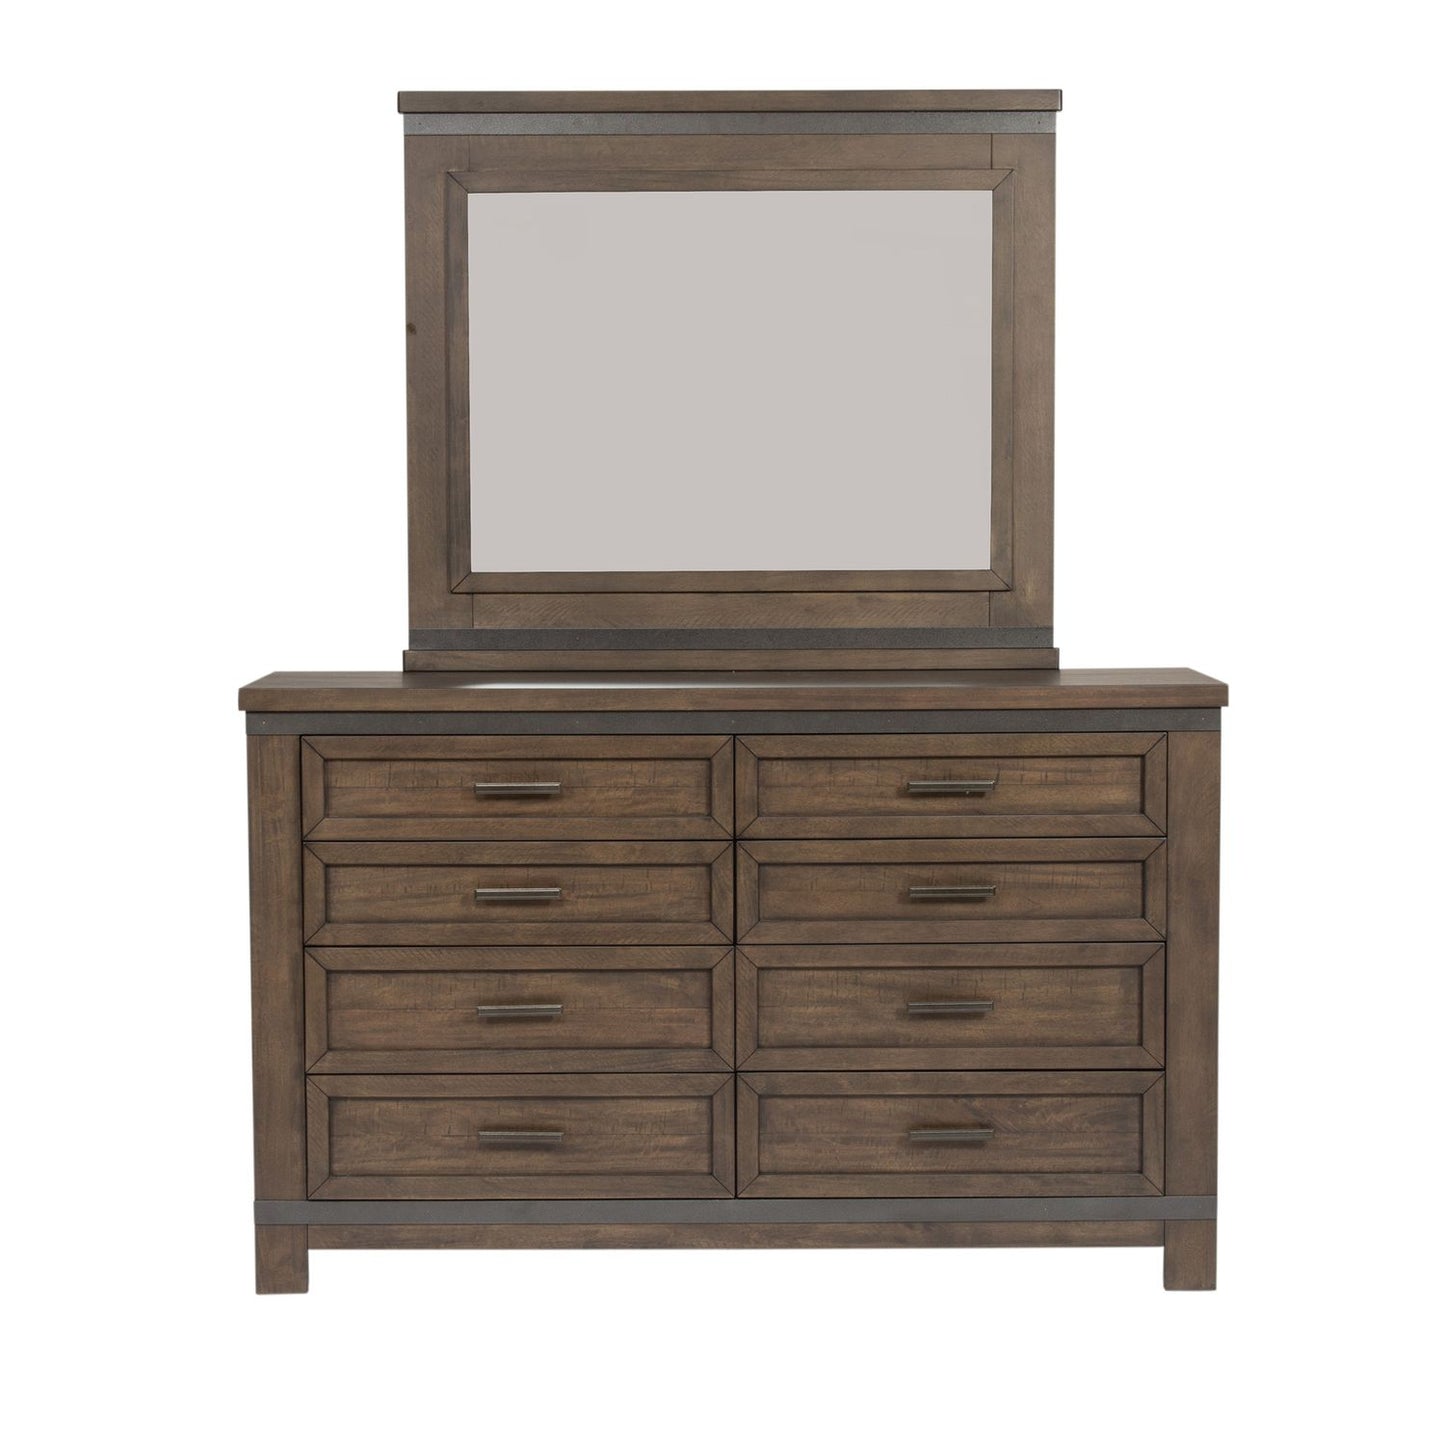 Thornwood Hills - King Two Sided Storage Bed, Dresser & Mirror, Chest, Night Stand